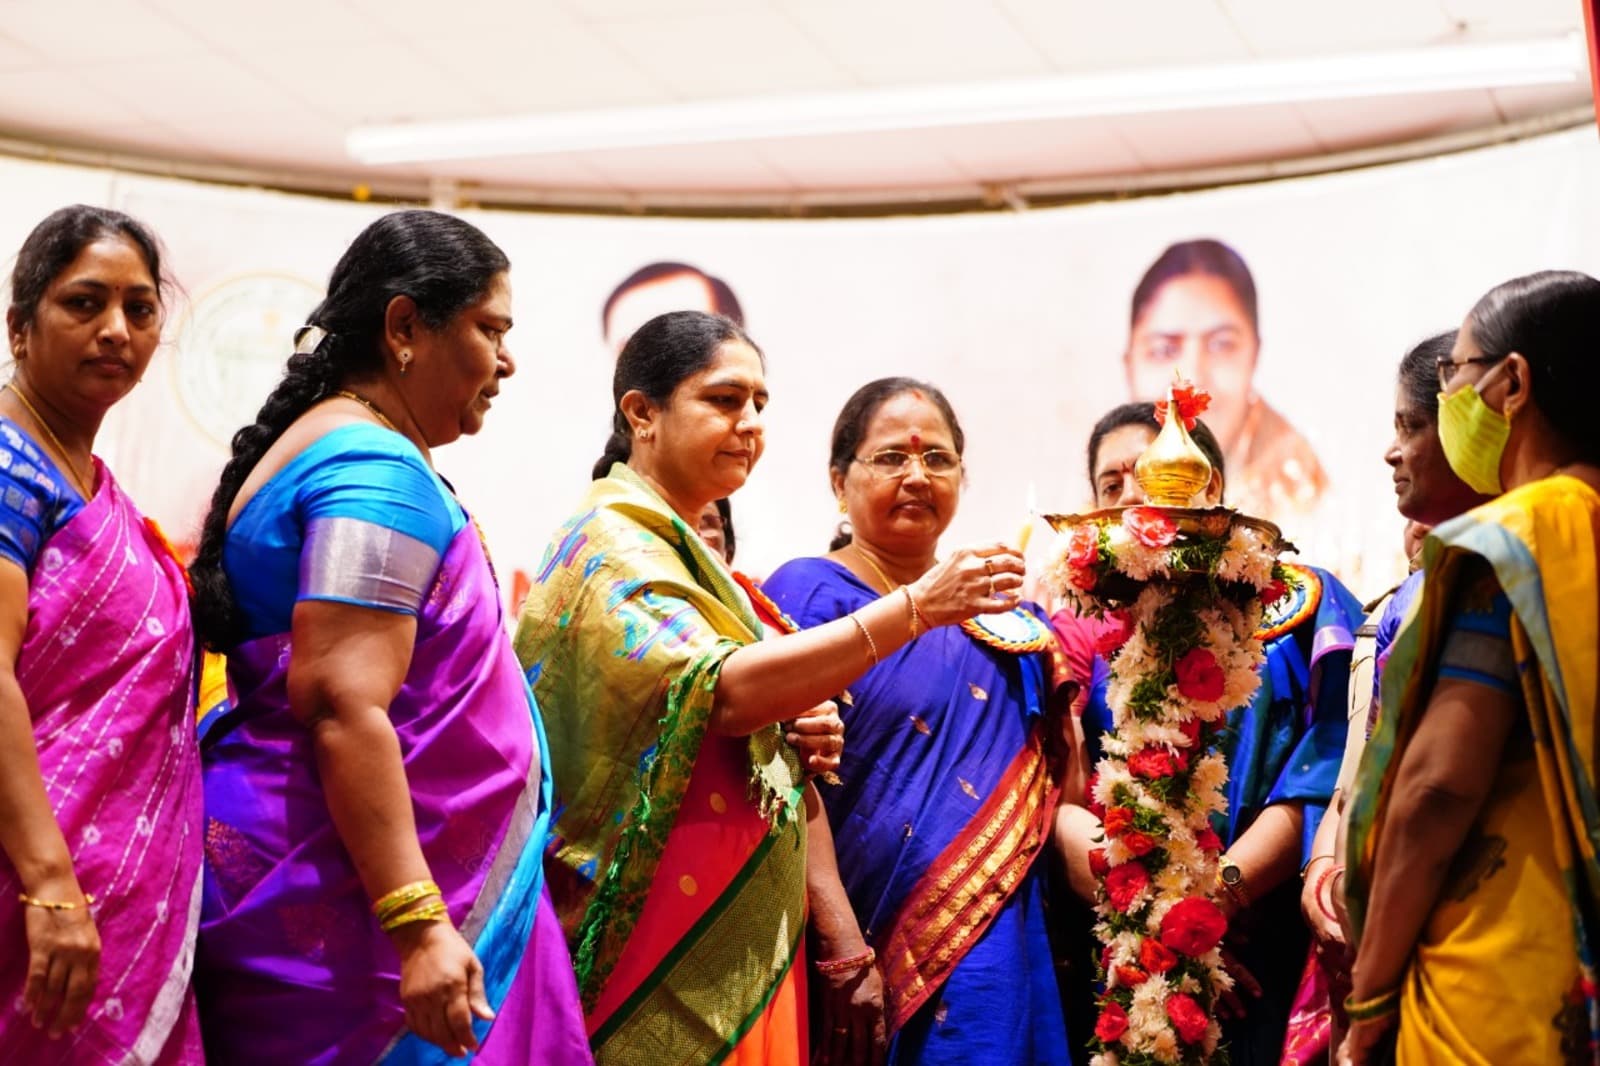 Telangana State Commission for Women celebrated International Women’s Day